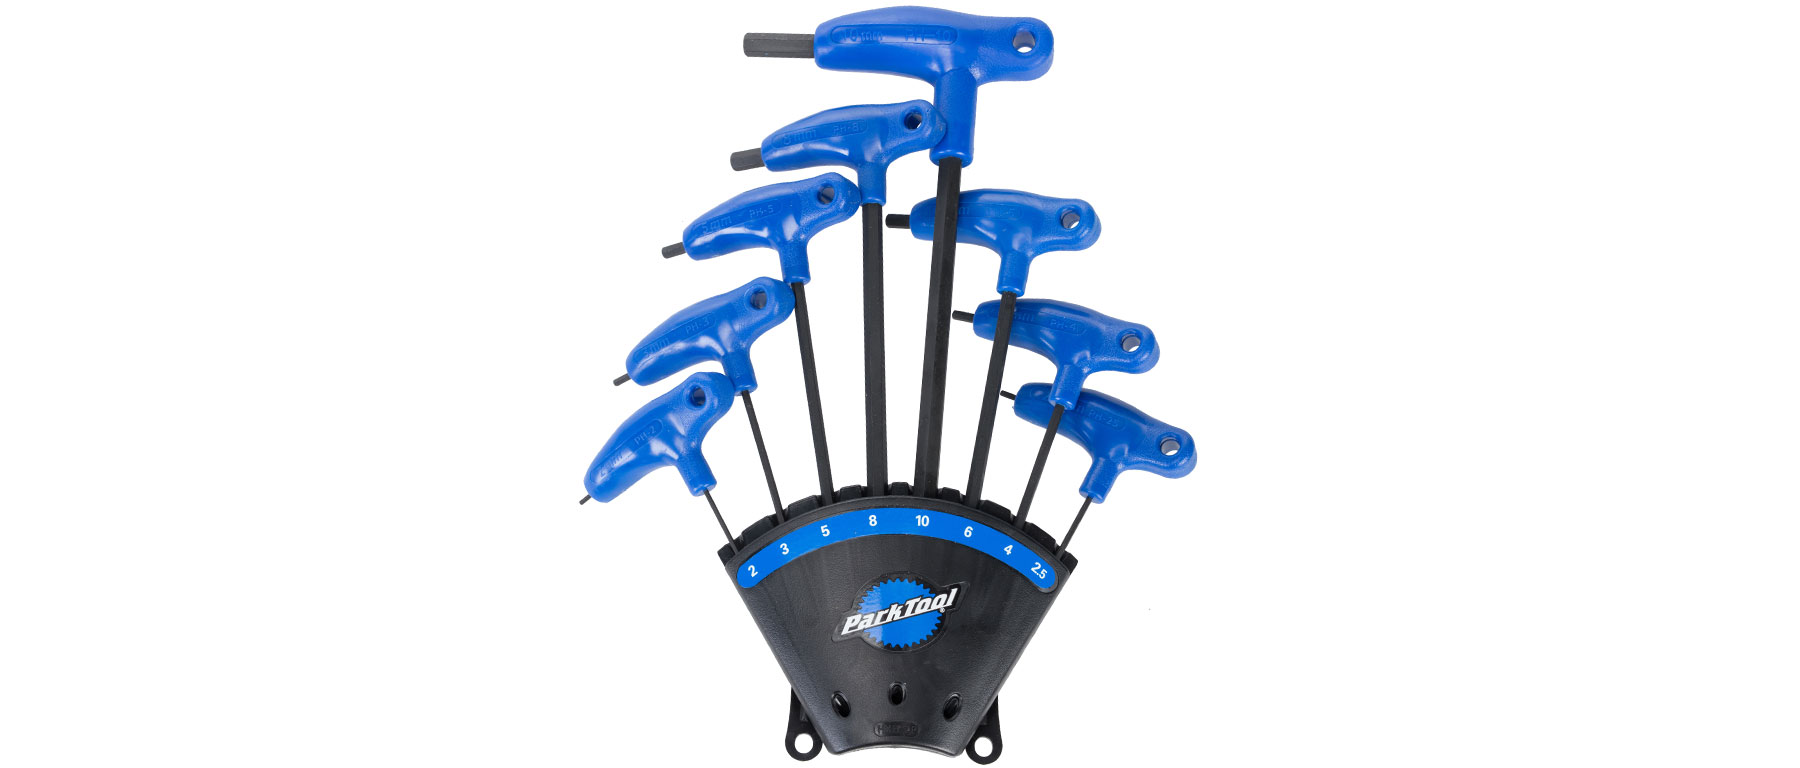 Park Tool PH-1.2 P-Handle Hex Wrench Set for sale online 